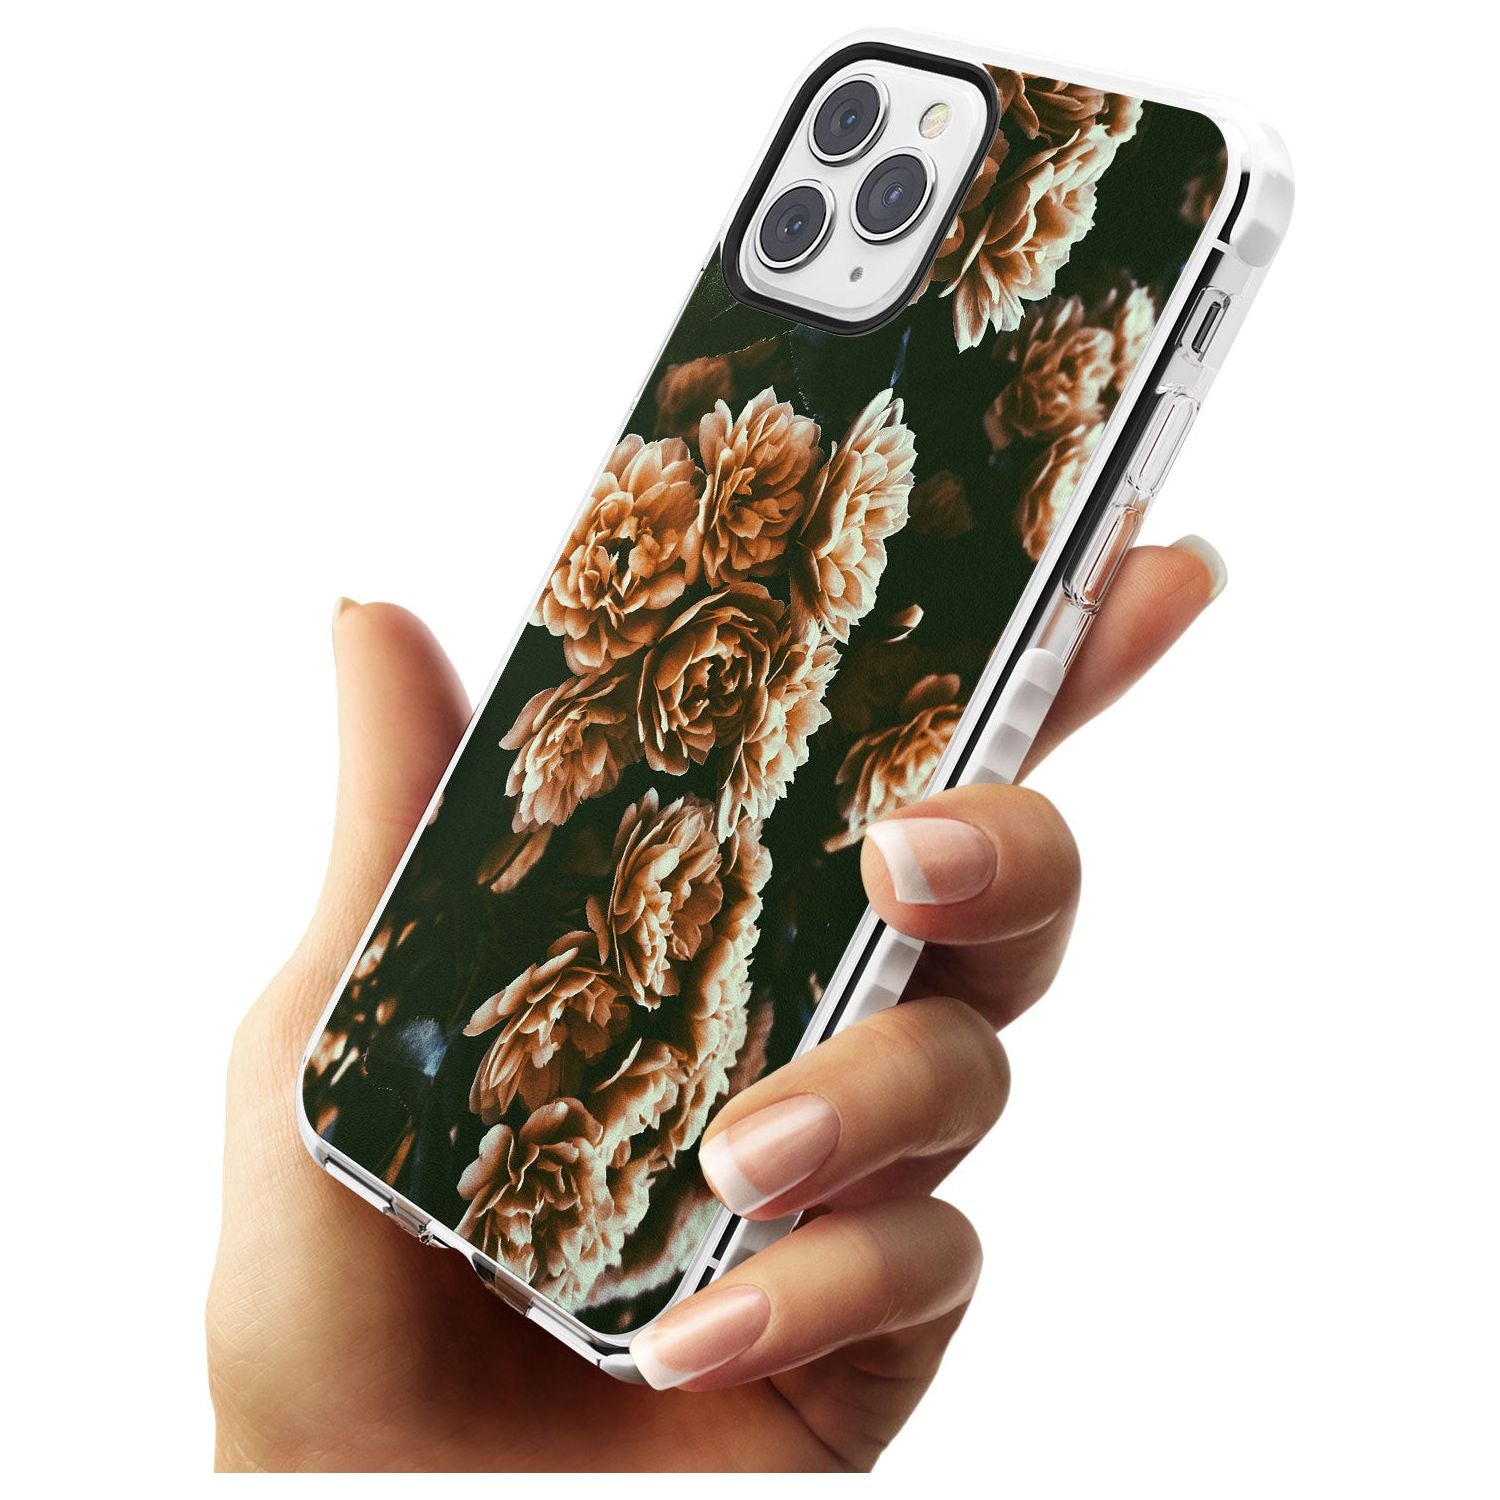 White Peonies - Real Floral Photographs Impact Phone Case for iPhone 11 Pro Max